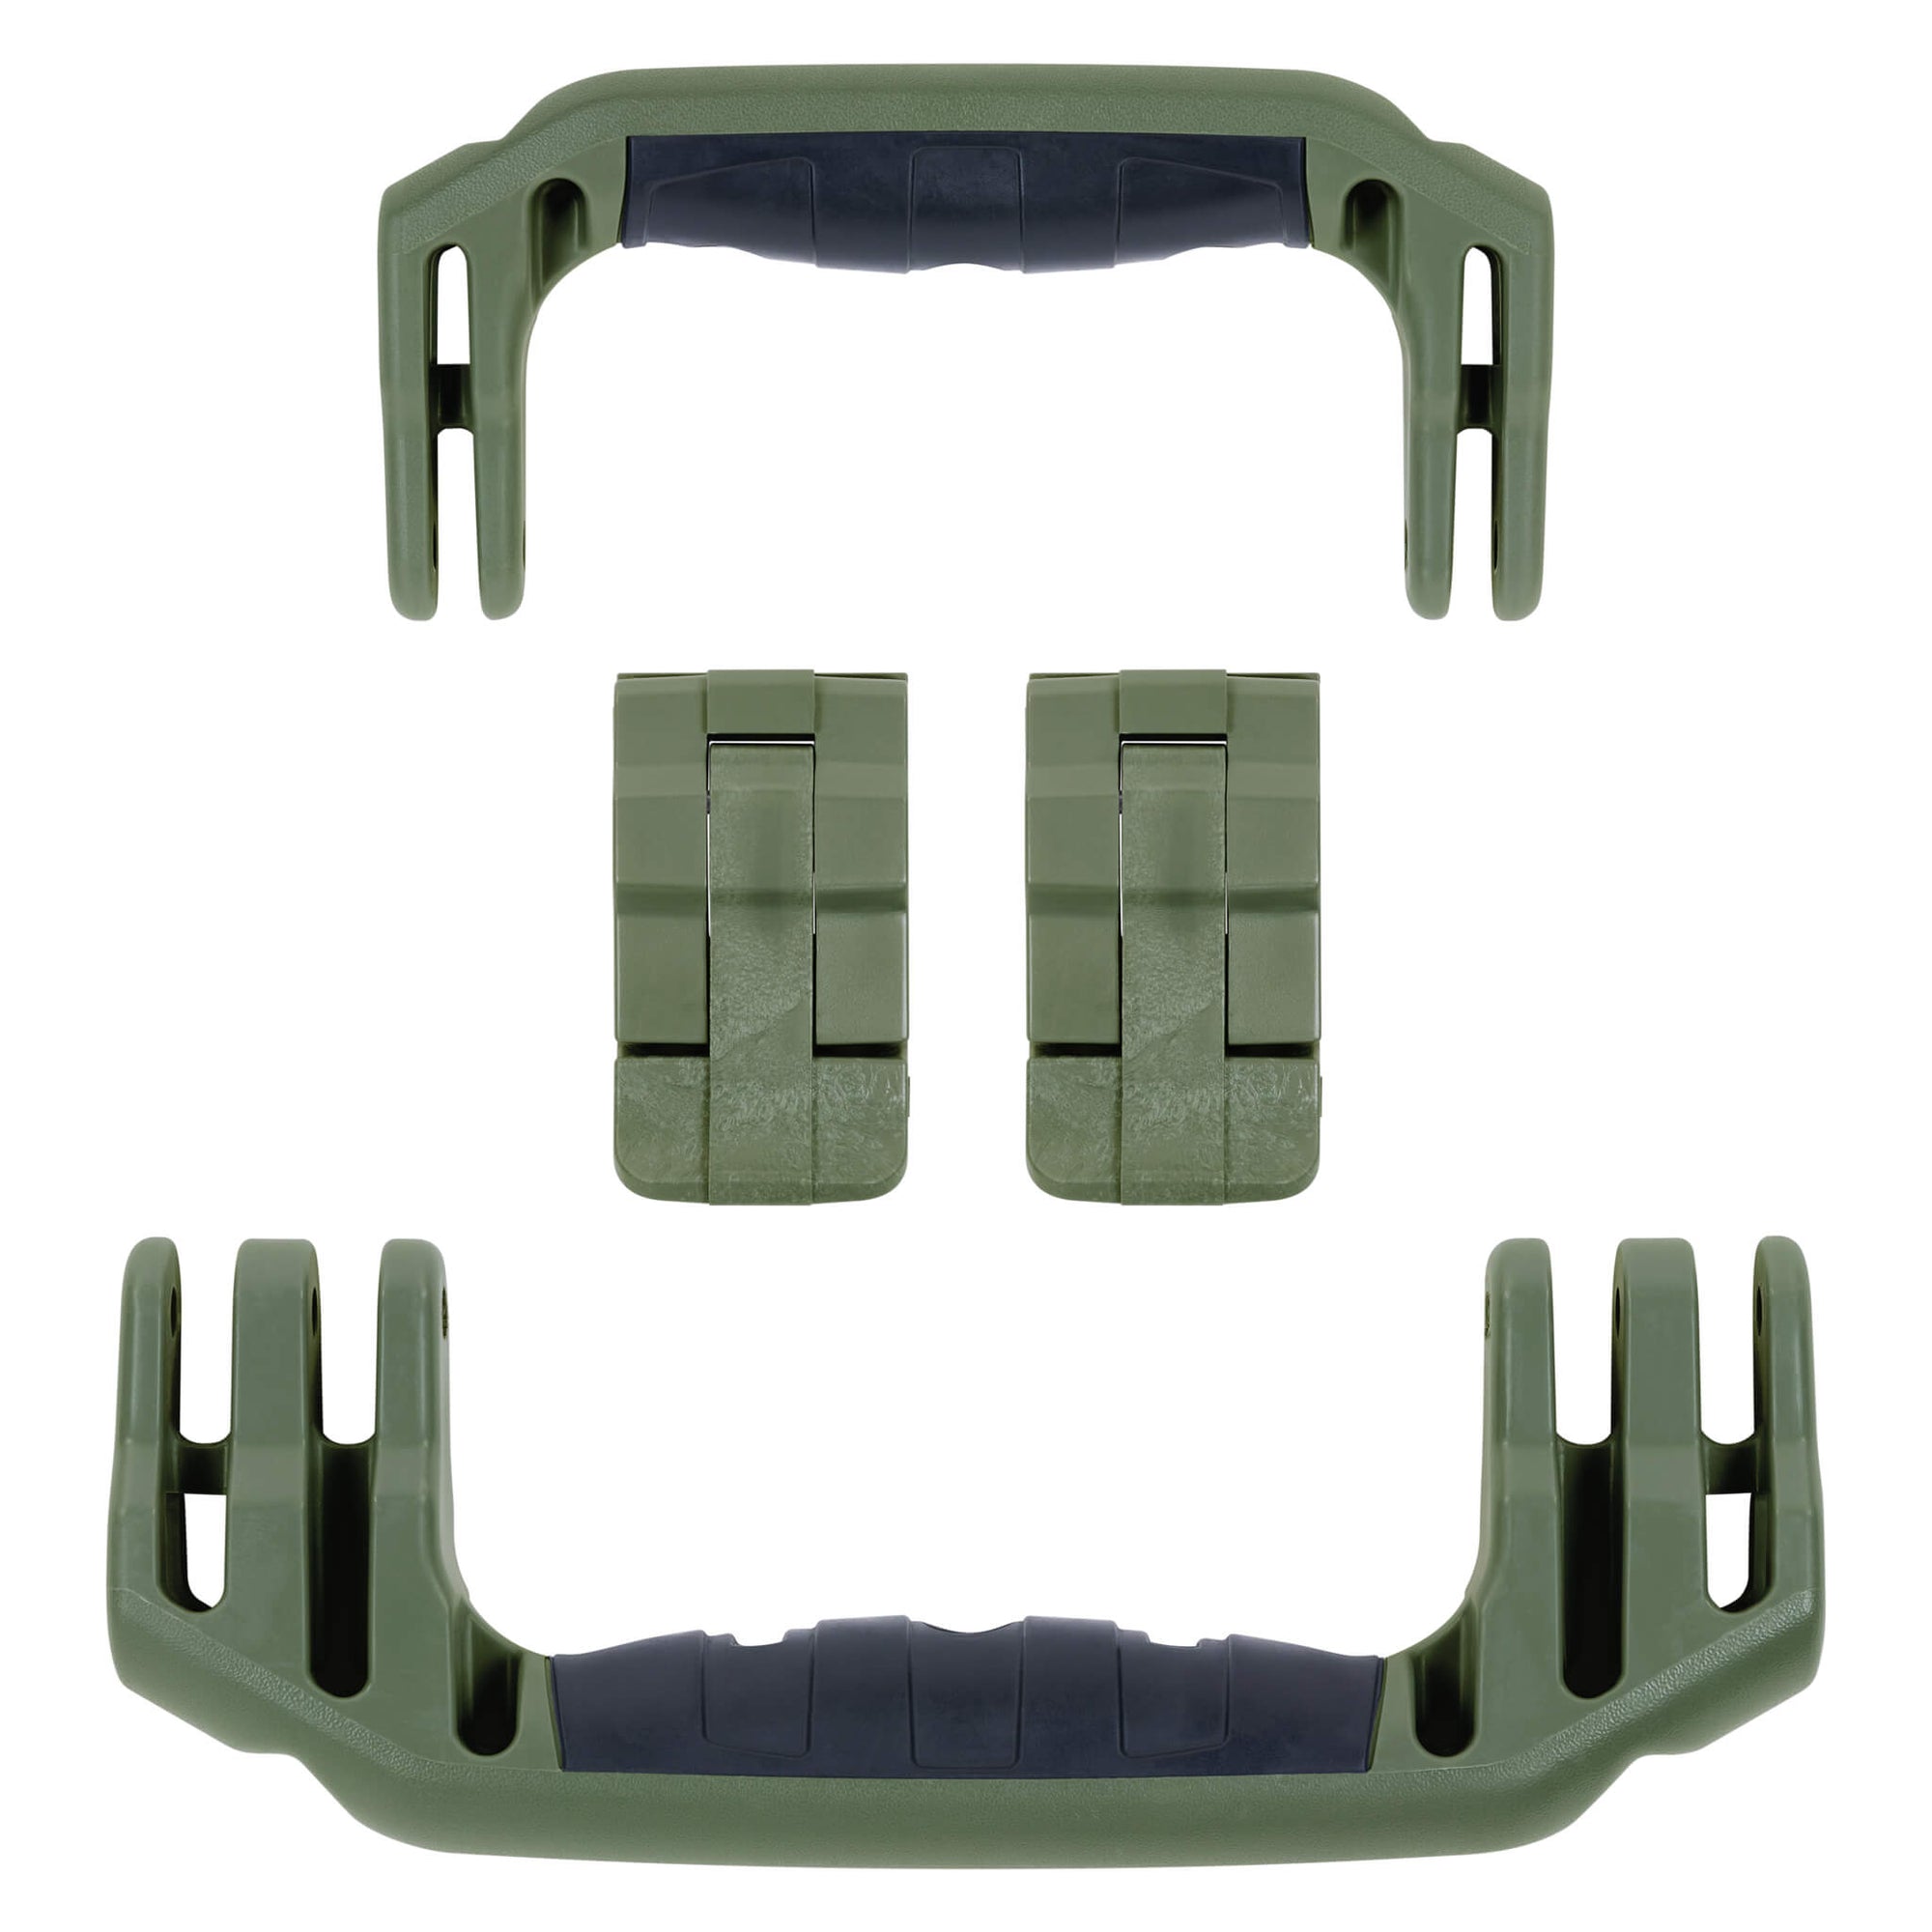 Pelican 1510 Replacement Handles & Latches, OD Green (Set of 2 Handles, 2 Latches) ColorCase 